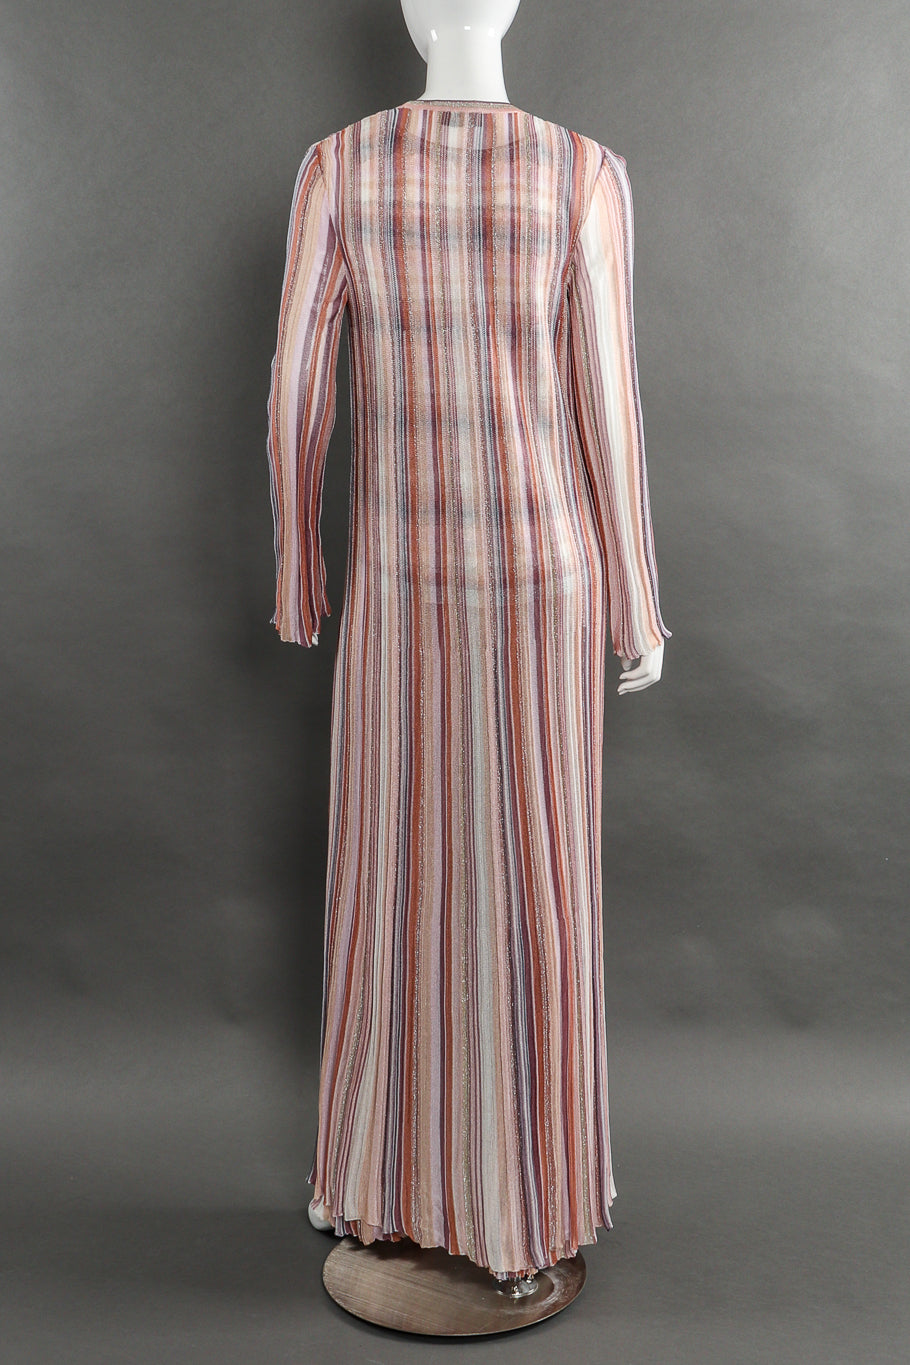 Missoni Striped Knit Duster, Tank, and Pants Set back view on mannequin @Recessla